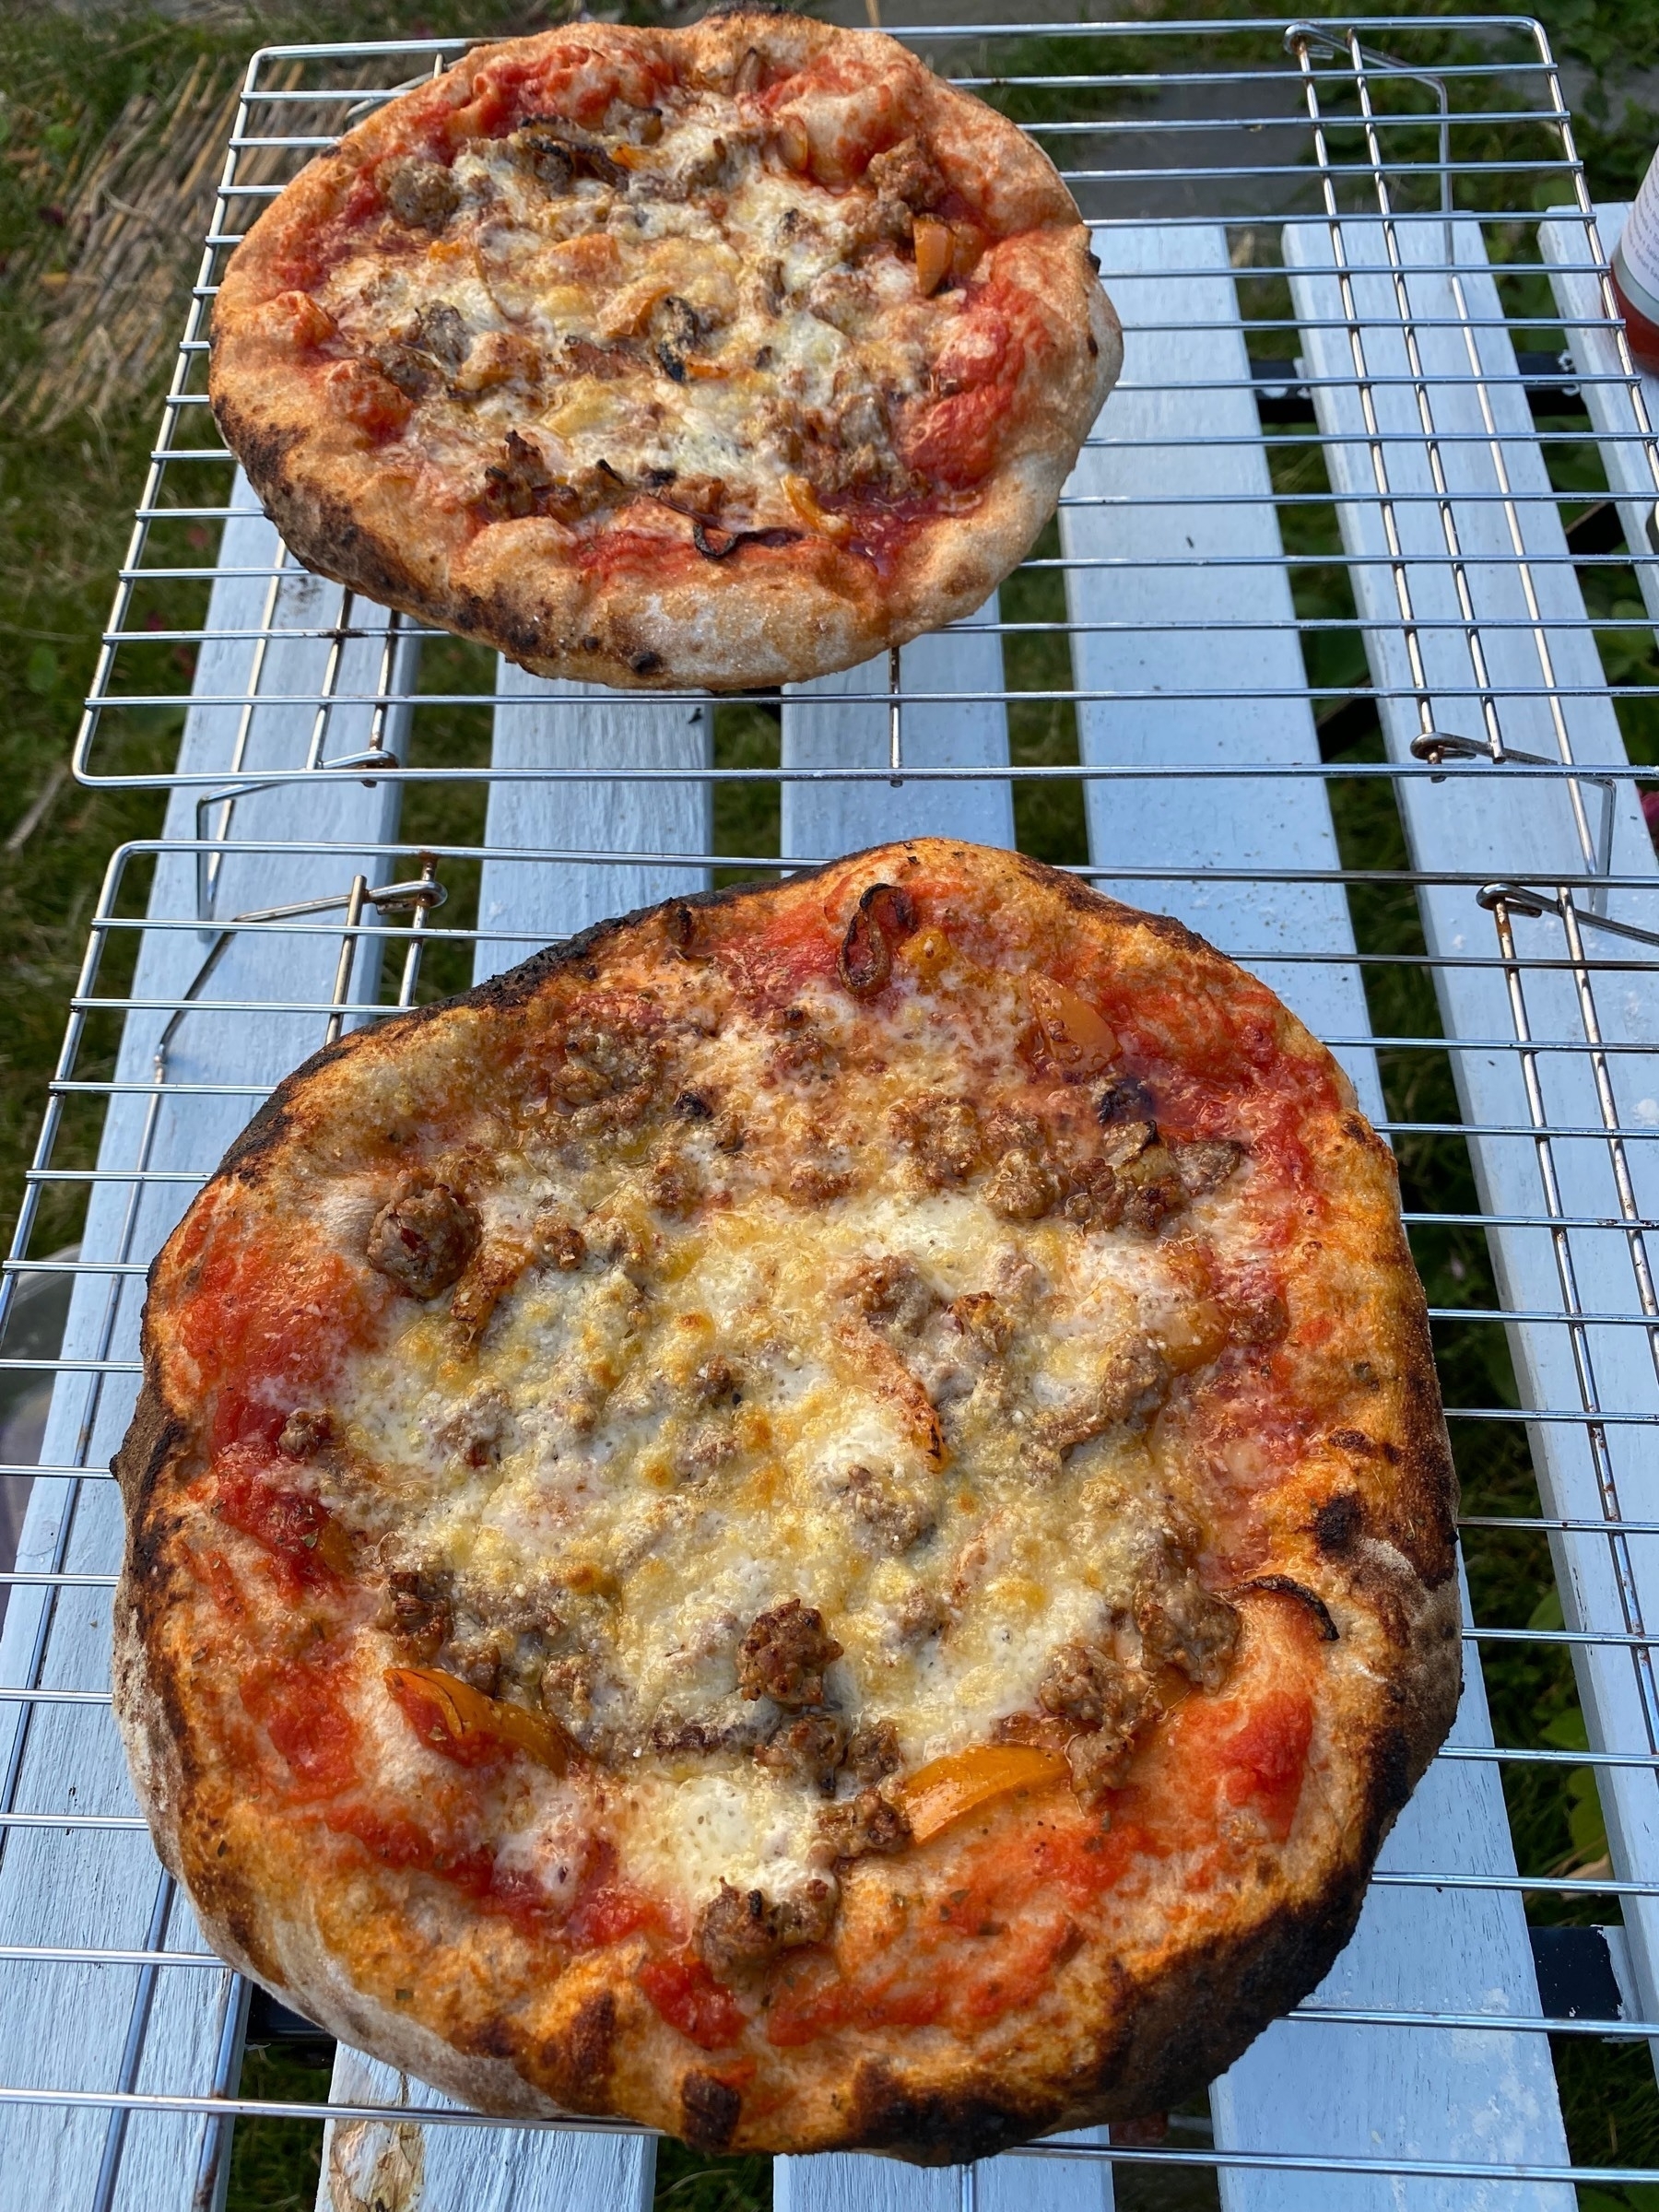 Two small pizzas on cooling racks.